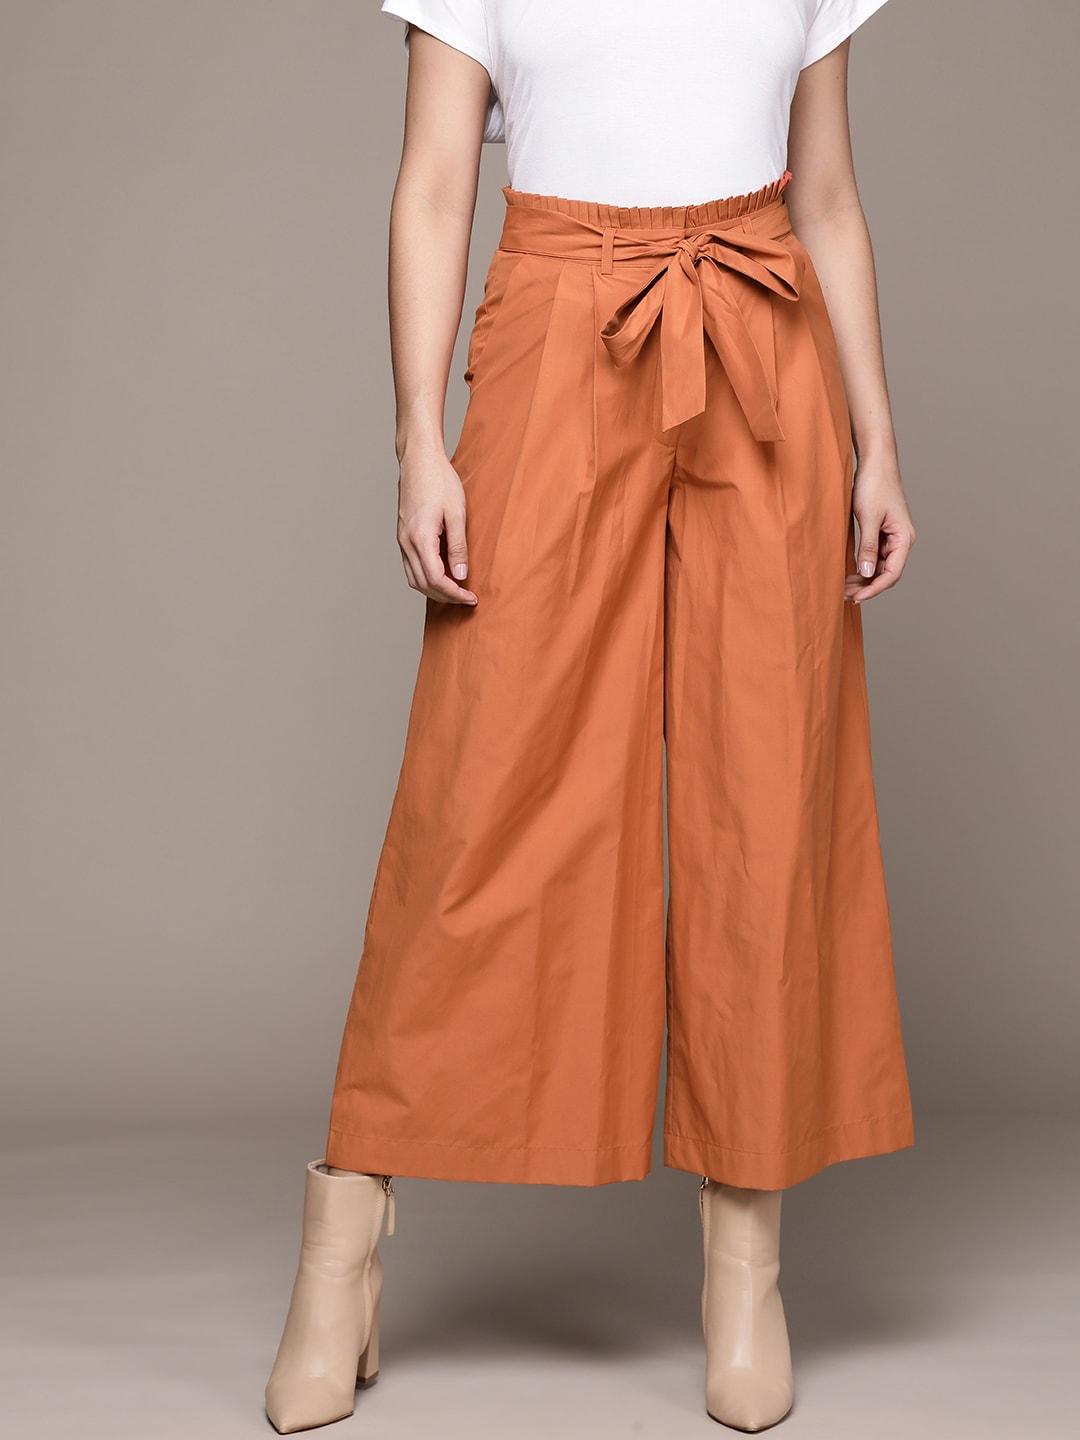 label ritu kumar women relaxed loose fit pleated culottes trousers with tie-up detail